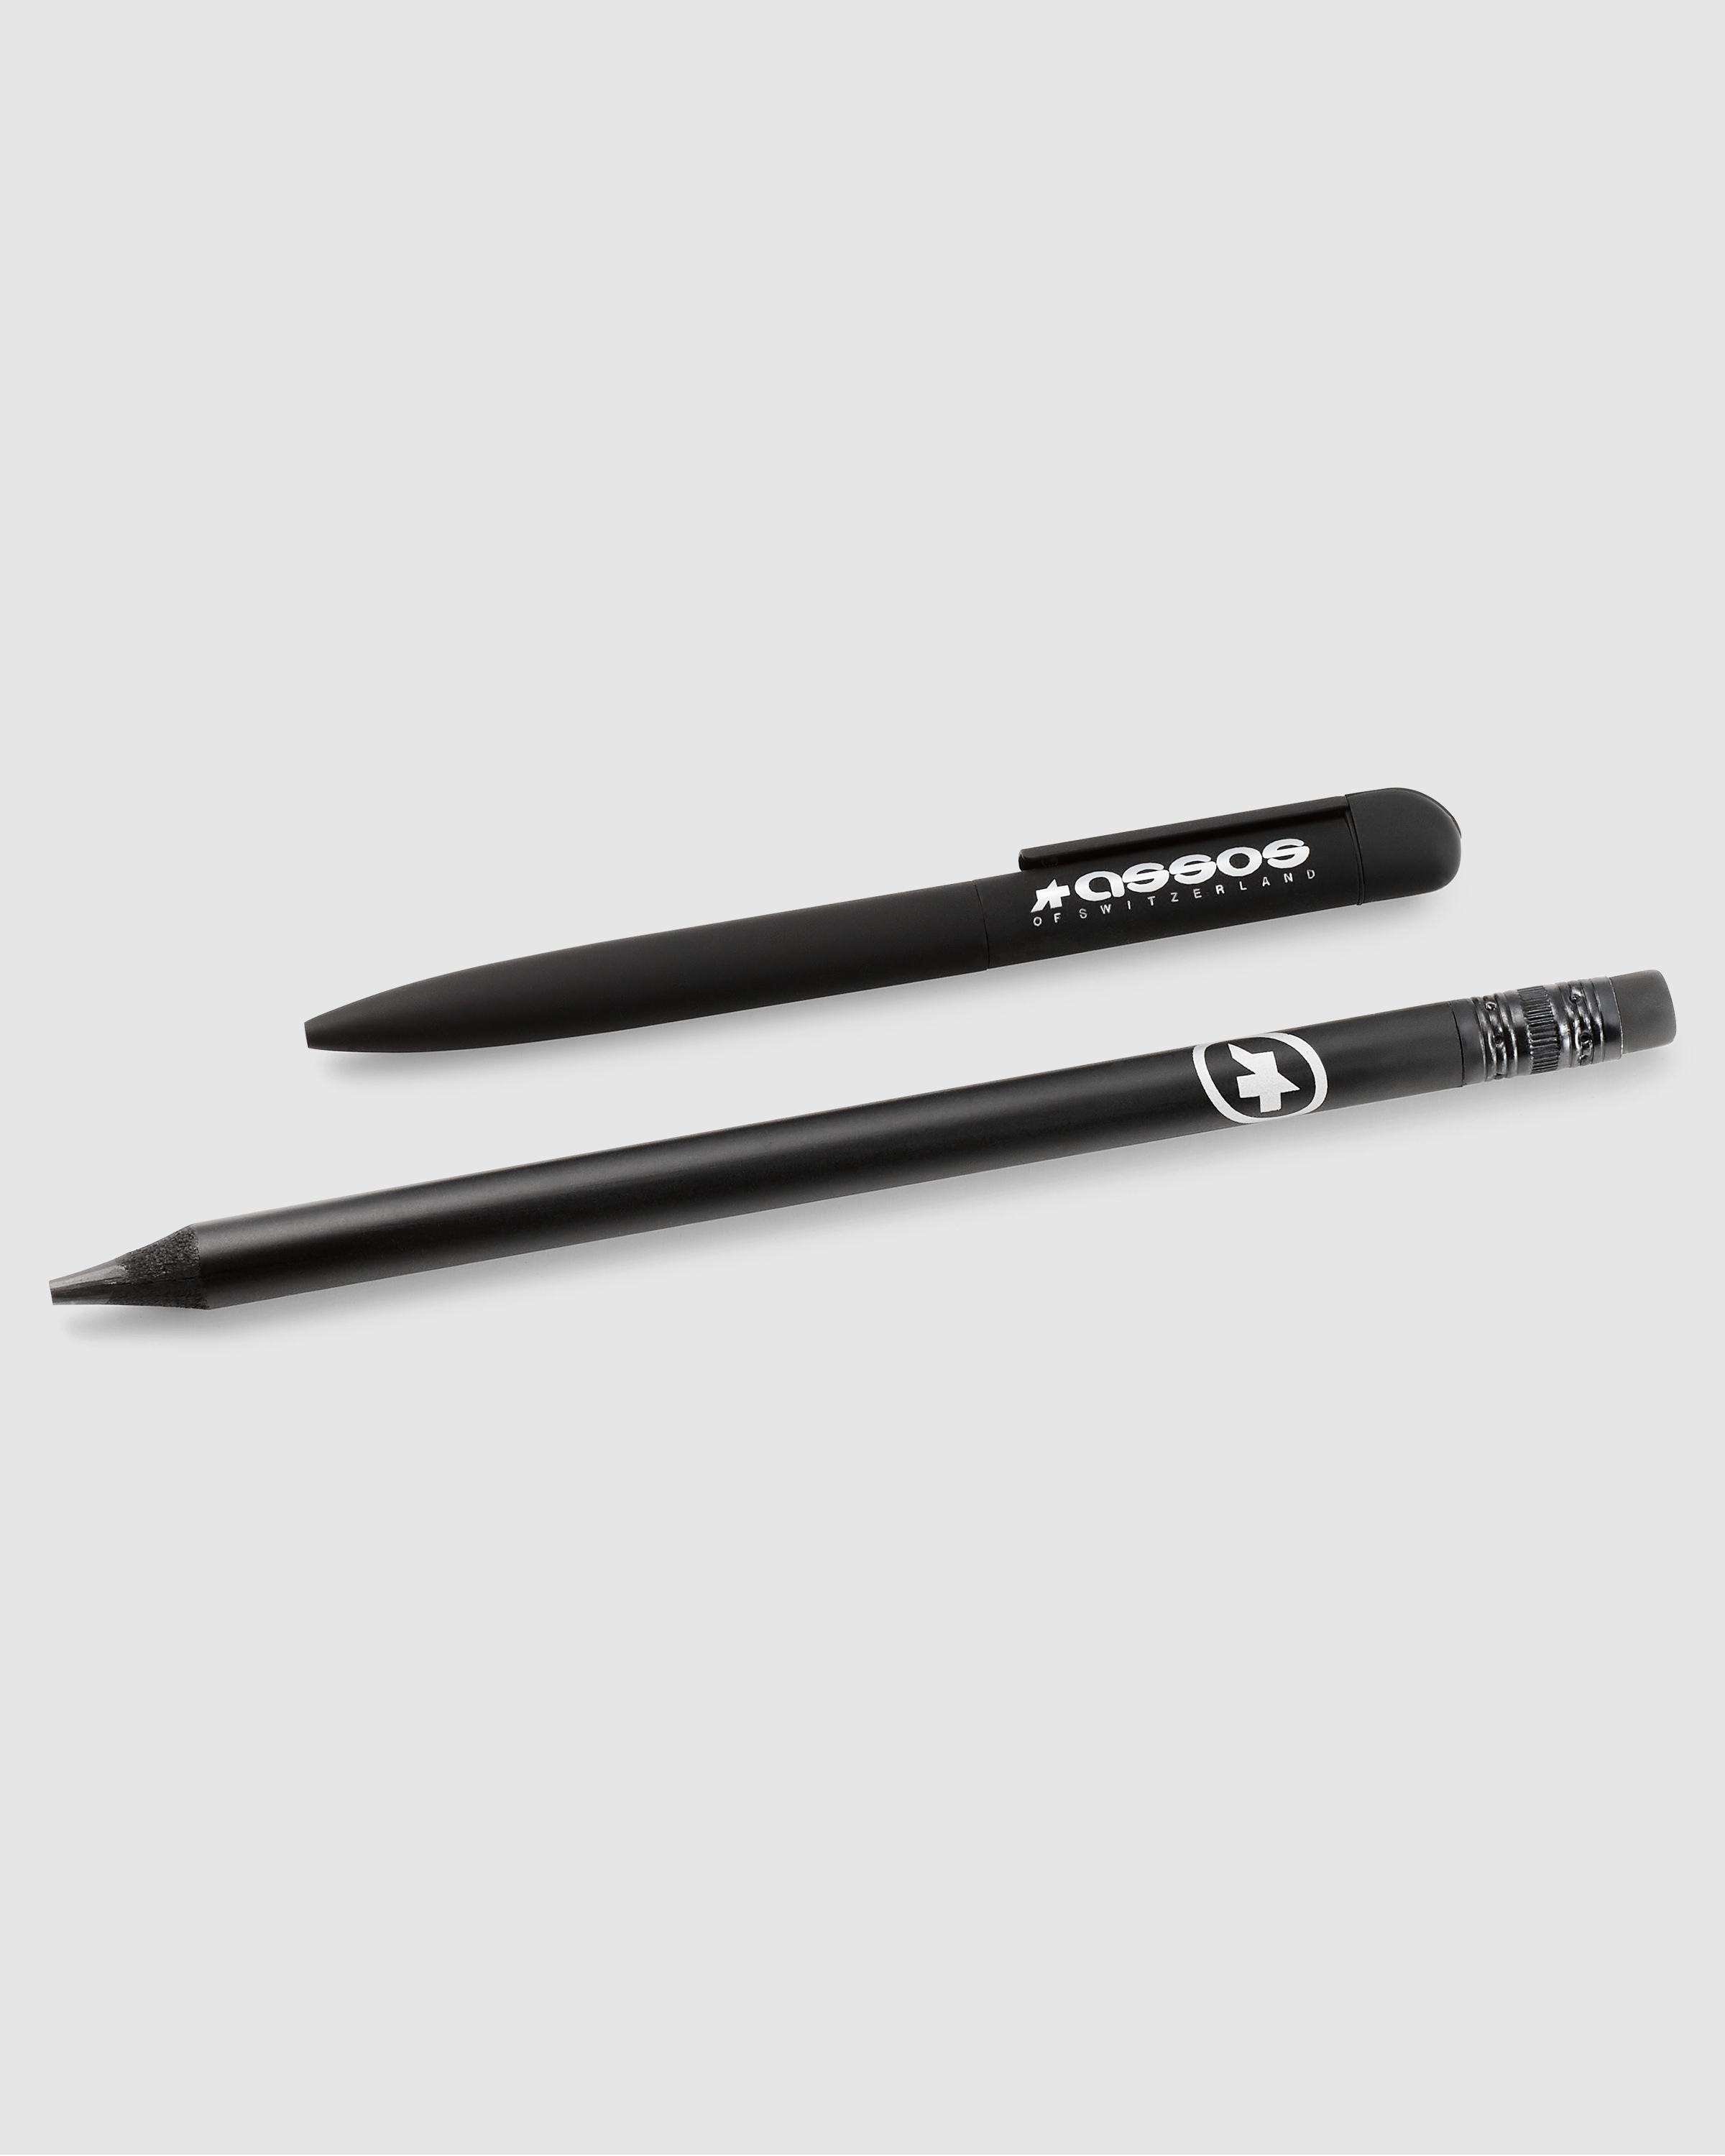 ASSOS Pen and Pencil - ASSOS Of Switzerland - Official Outlet